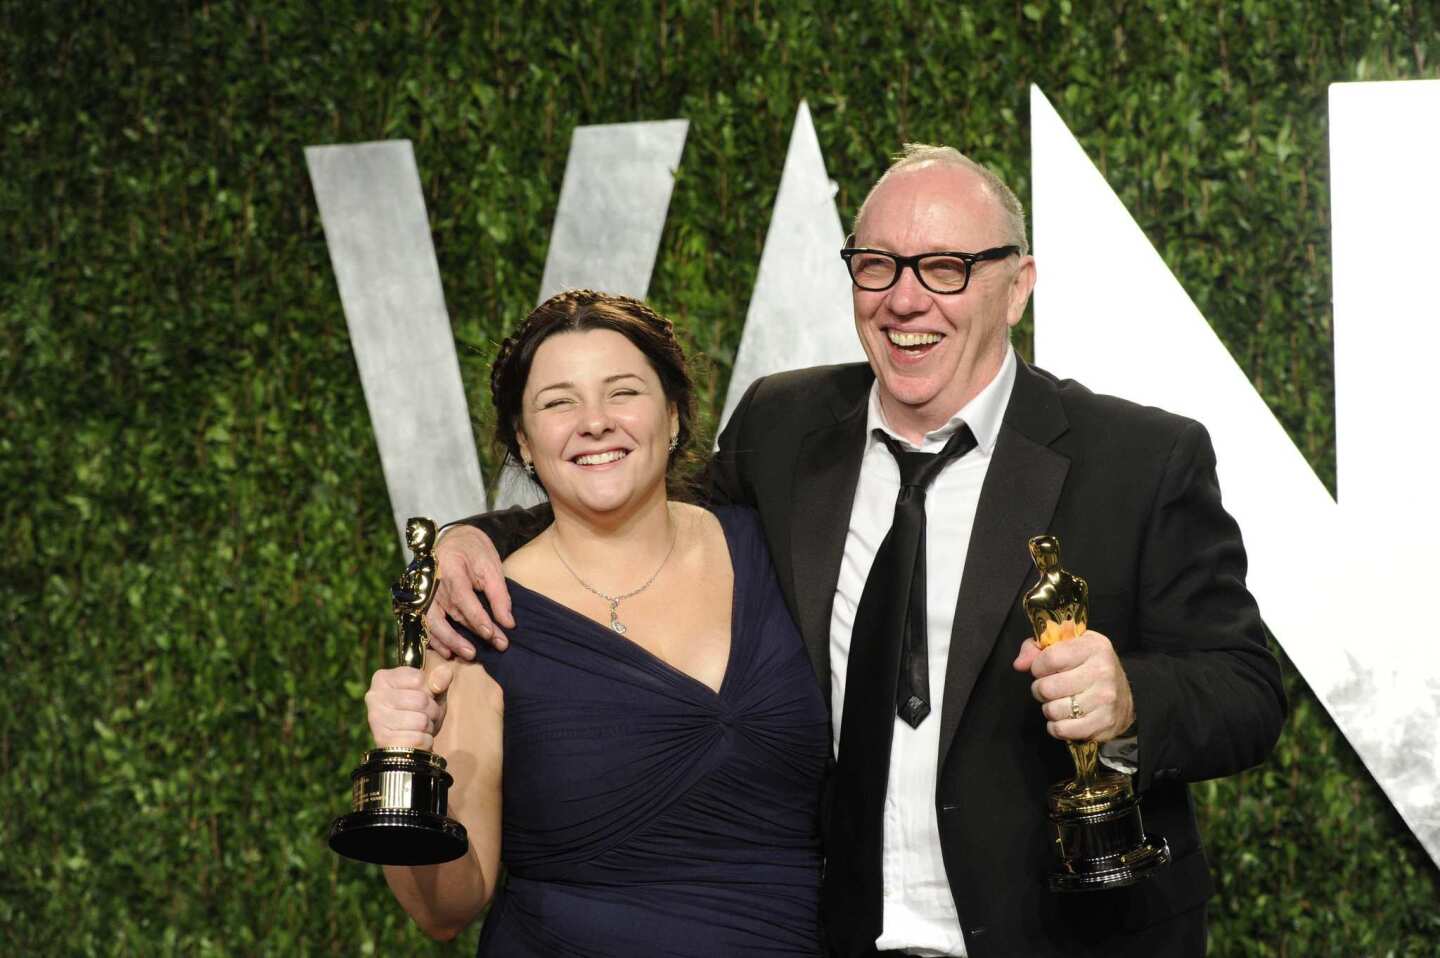 Oorlagh George, left, and Terry George pose with their Oscar statues. They won the Academy Award for their live-action short film "The Shore."